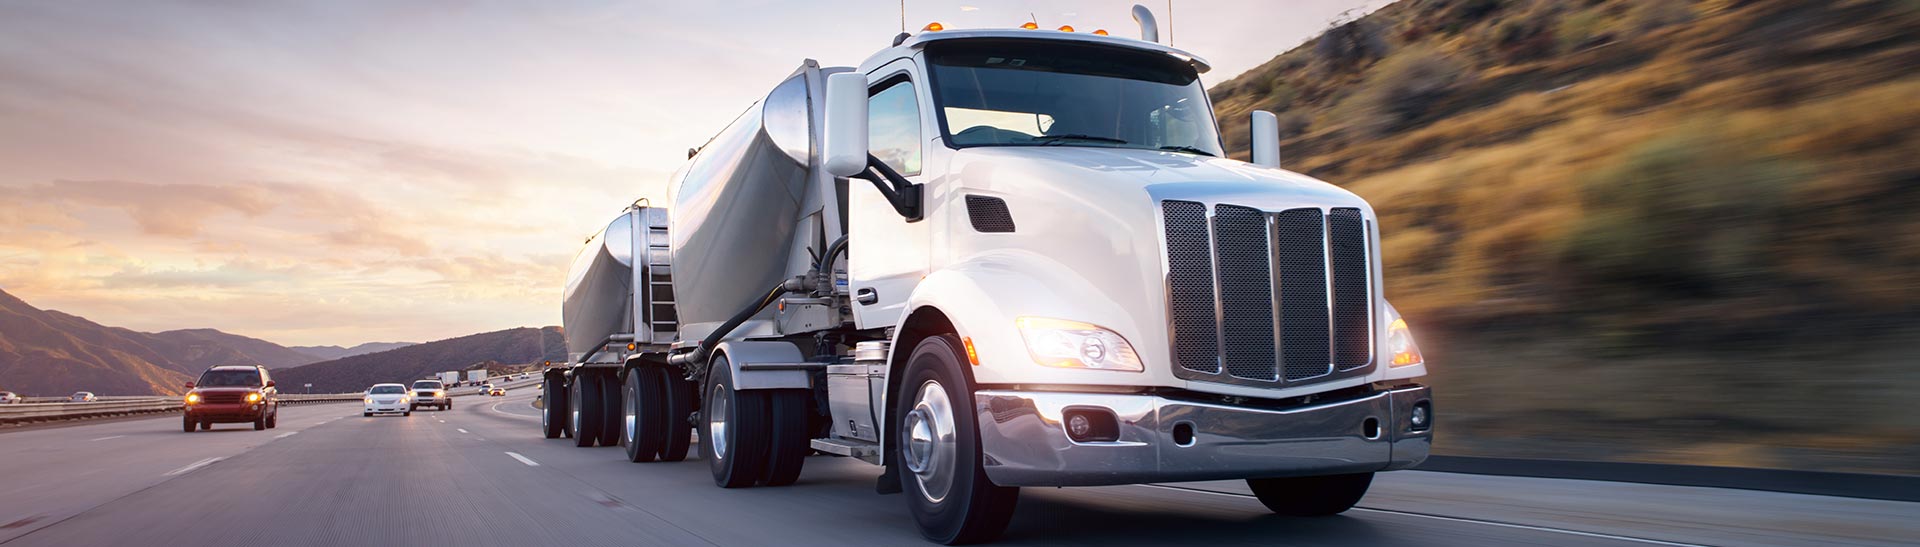 Windsor Long Haul Trucking, Trucking Services and Trucking Company